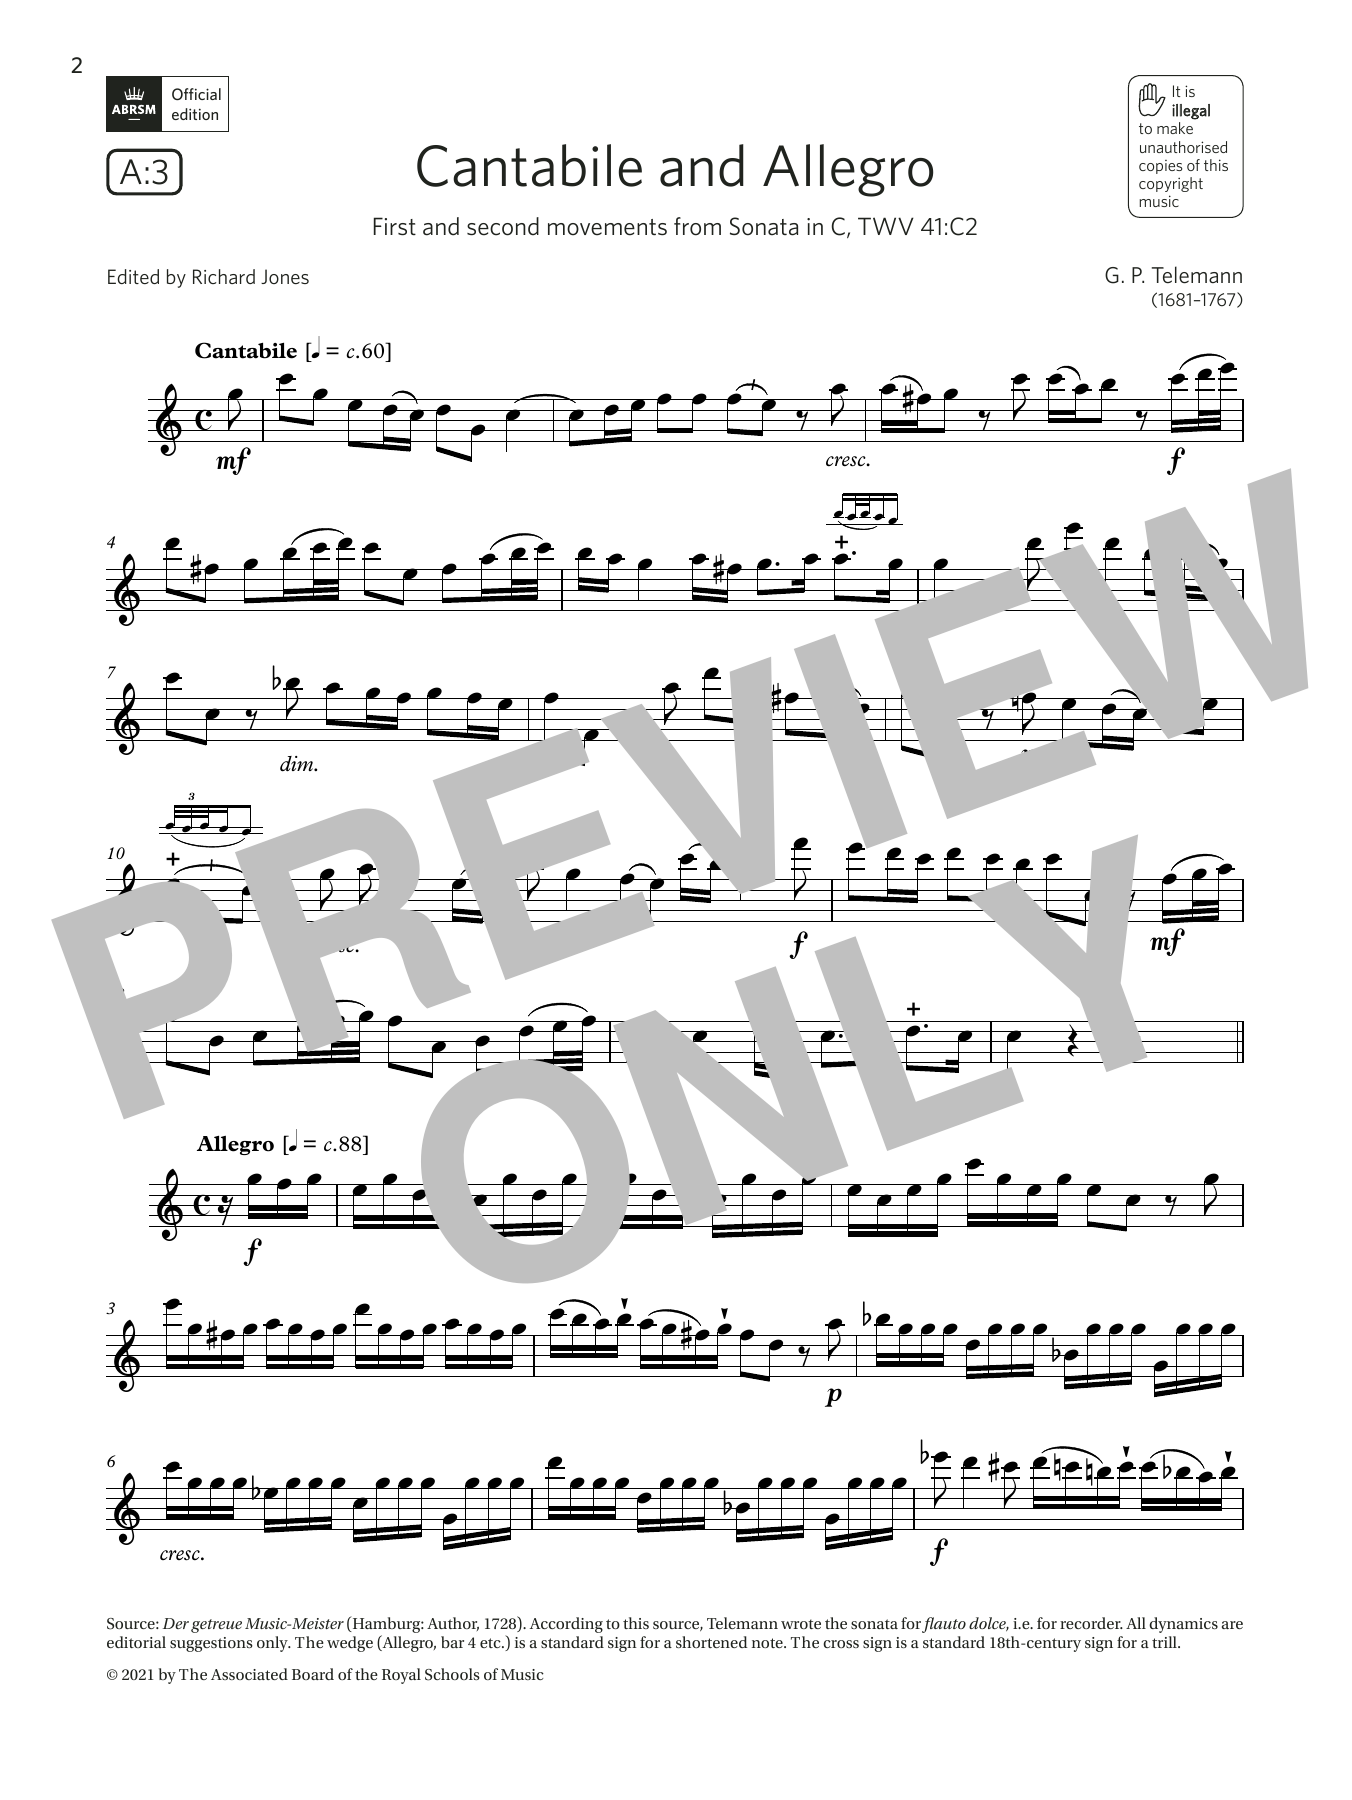 Download Georg Philipp Telemann Cantabile and Allegro (from Sonata in C Sheet Music